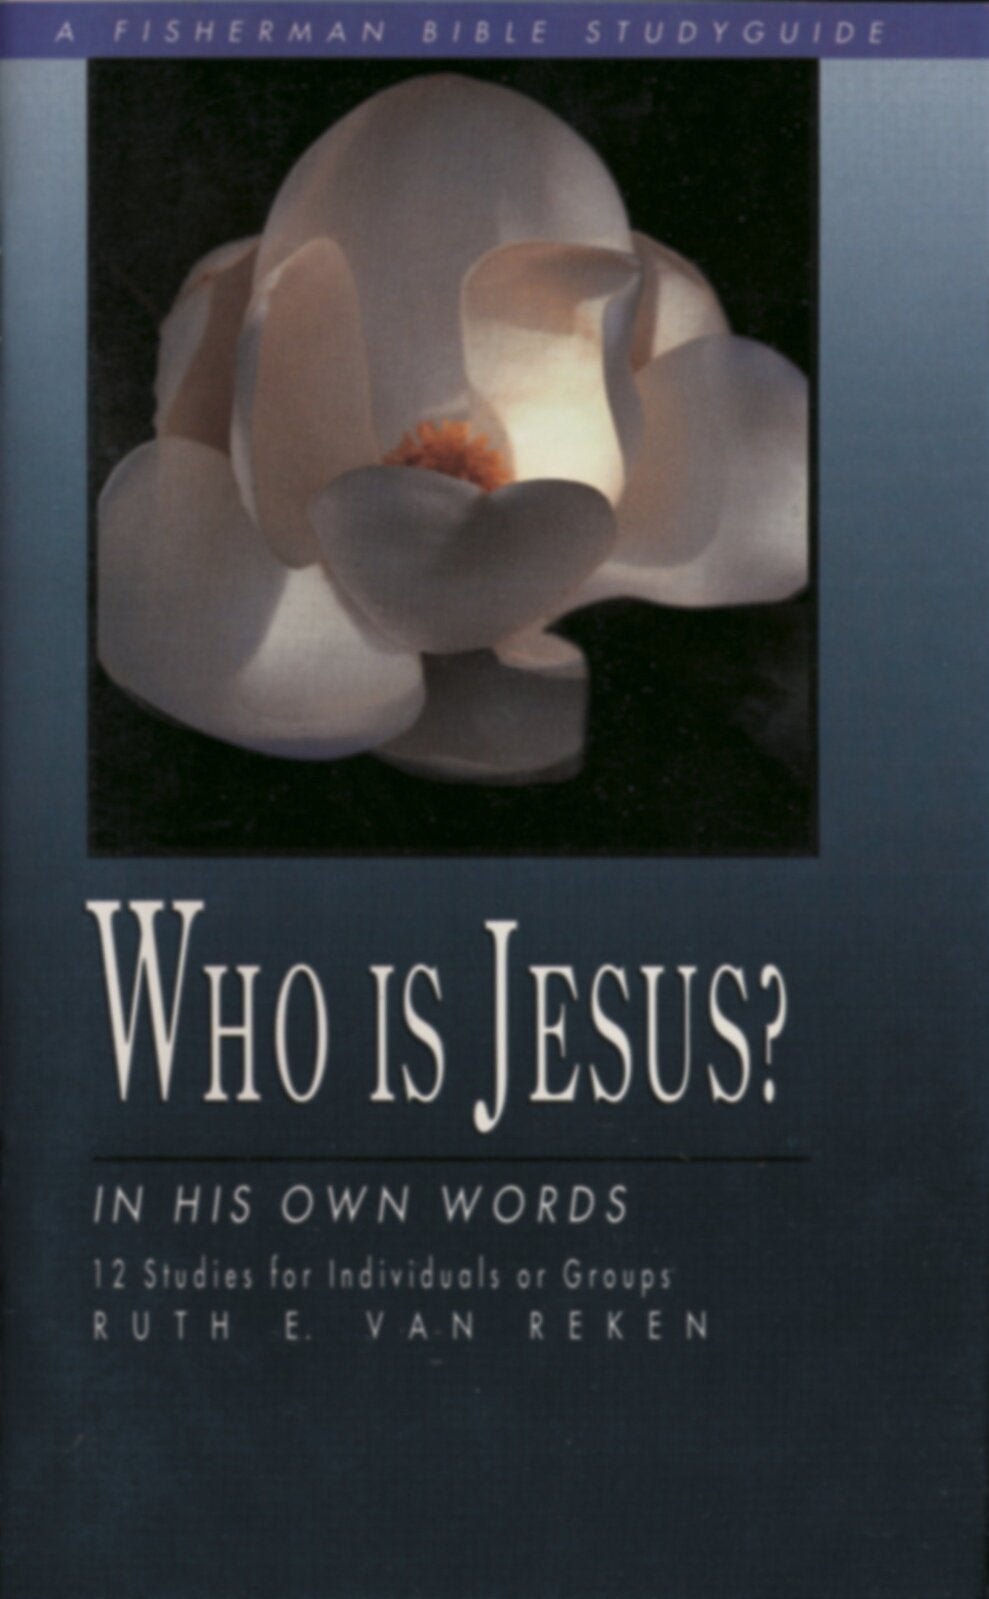 Who is Jesus? In His Own Words: 12 Studies (Fisherman Bible Study Guides)